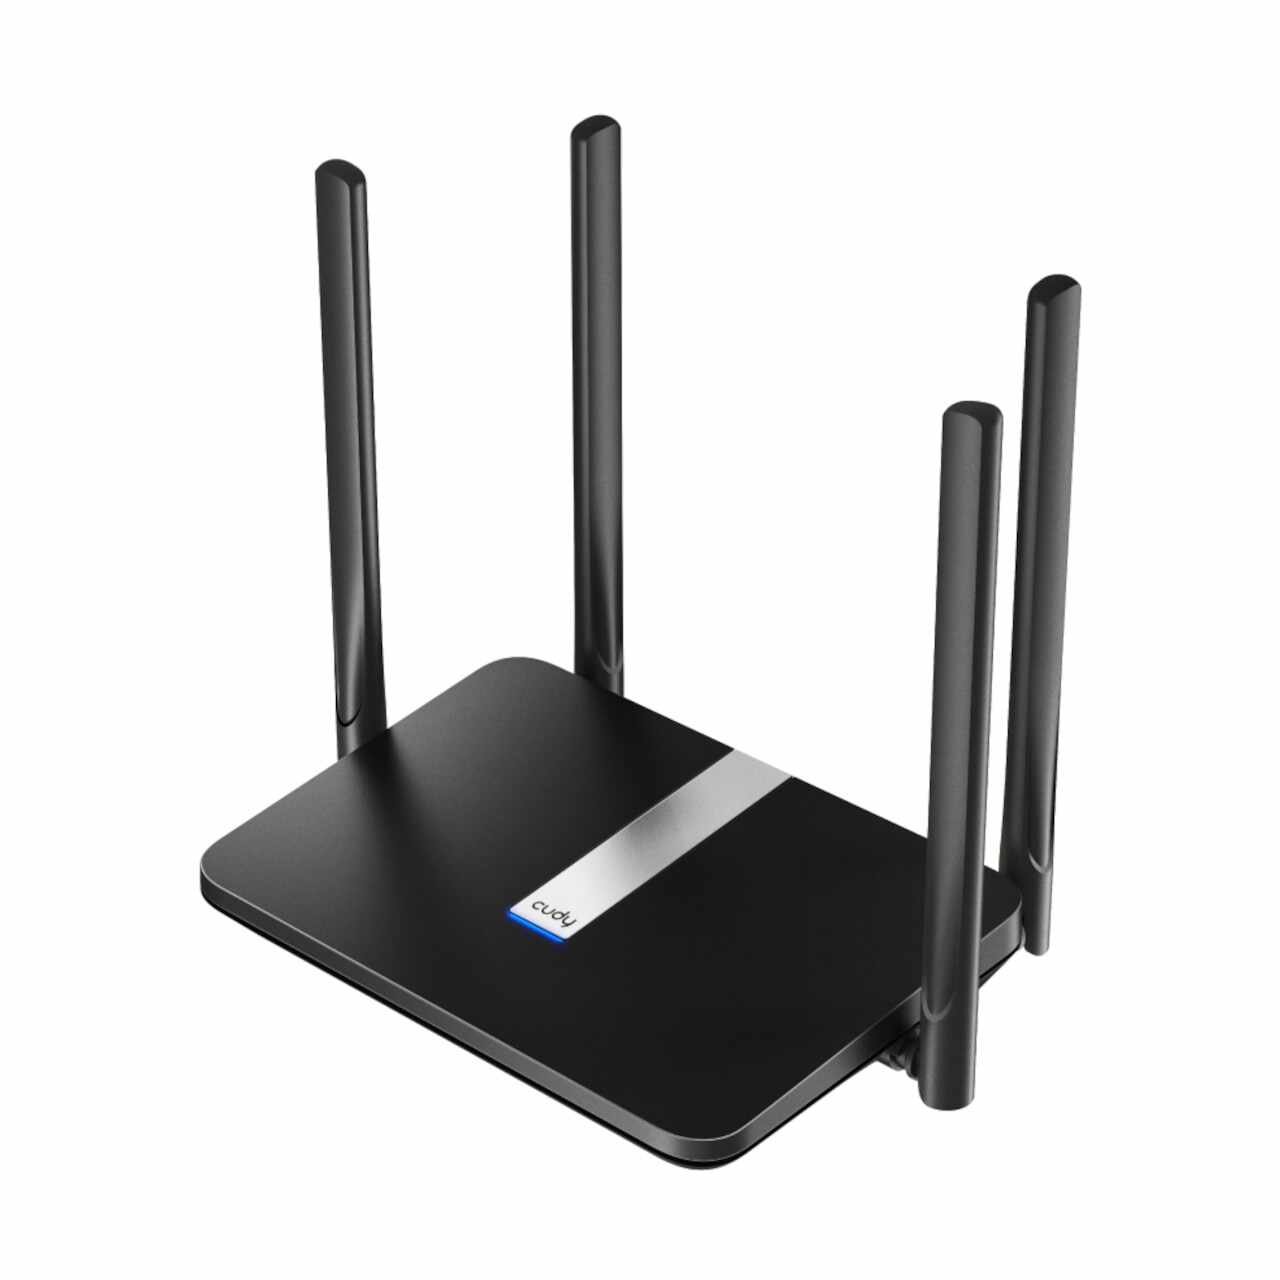 Router wireless Cudy LT500 Wi-Fi dual band